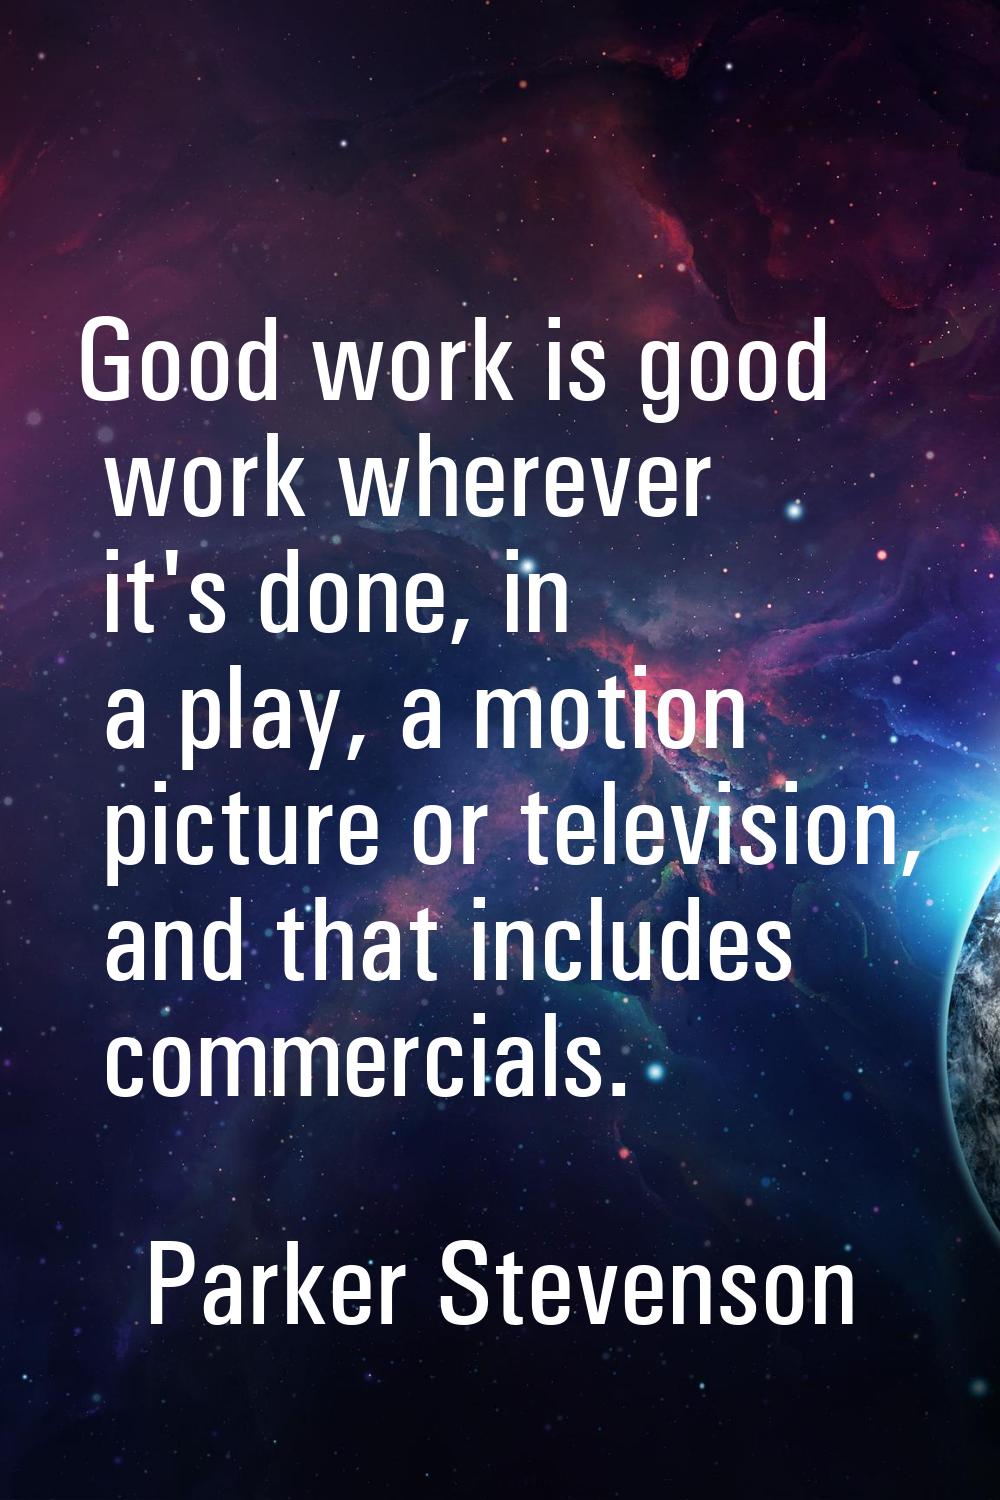 Good work is good work wherever it's done, in a play, a motion picture or television, and that incl